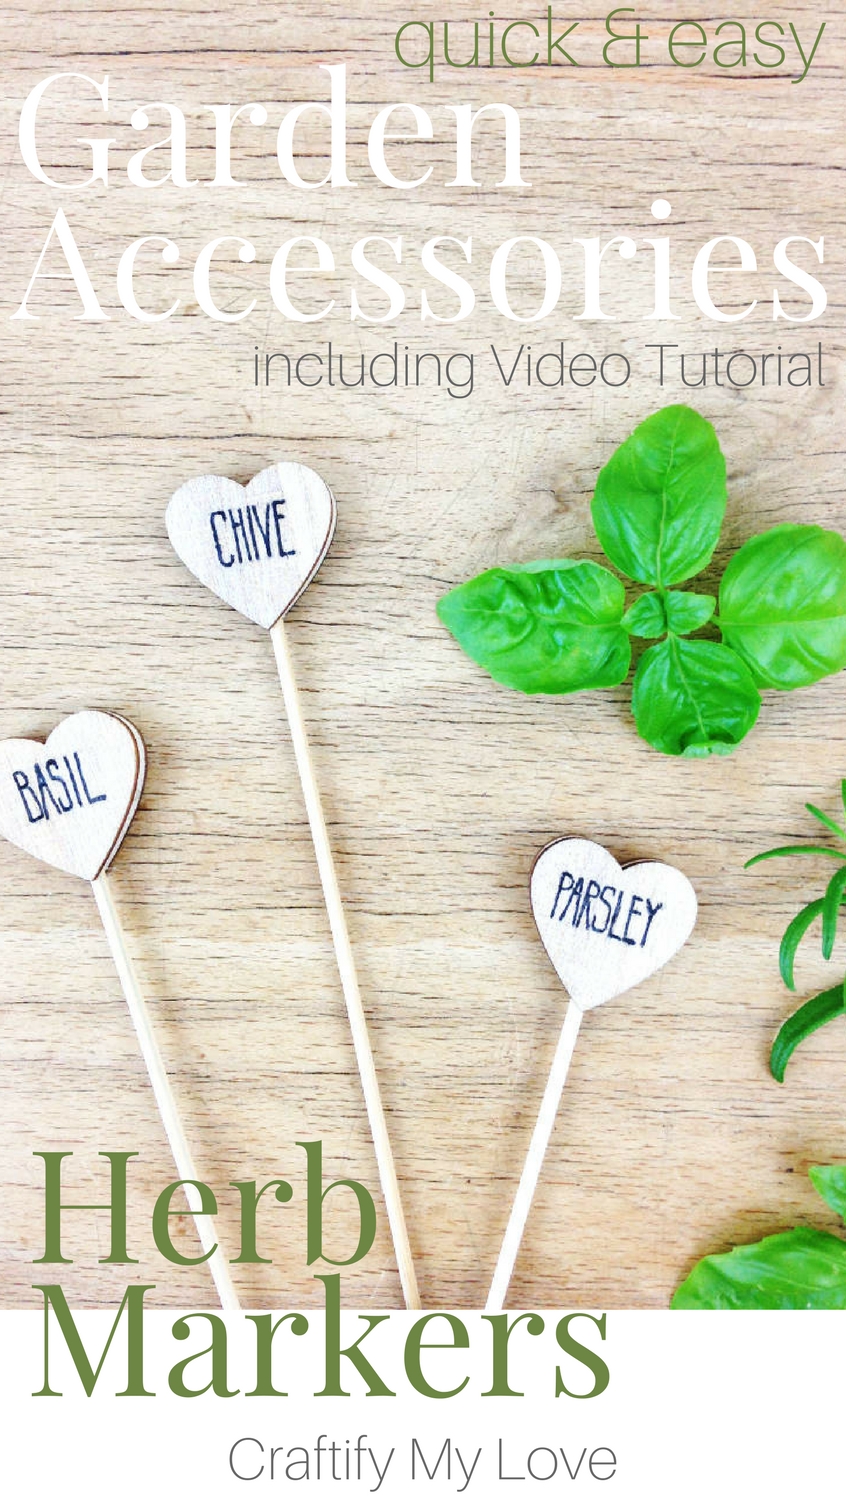 These DIY plant markers are a super easy crafts project for your herb garden! I'm so glad I had this idea s they make excellent little gifts for Mother's Day or when you're invited to your friends house. Click now for a simple step-by-step instructions including video tutorial! | #gardenDIY #herbmarkers #giftidea #simplecrafts #MothersDay